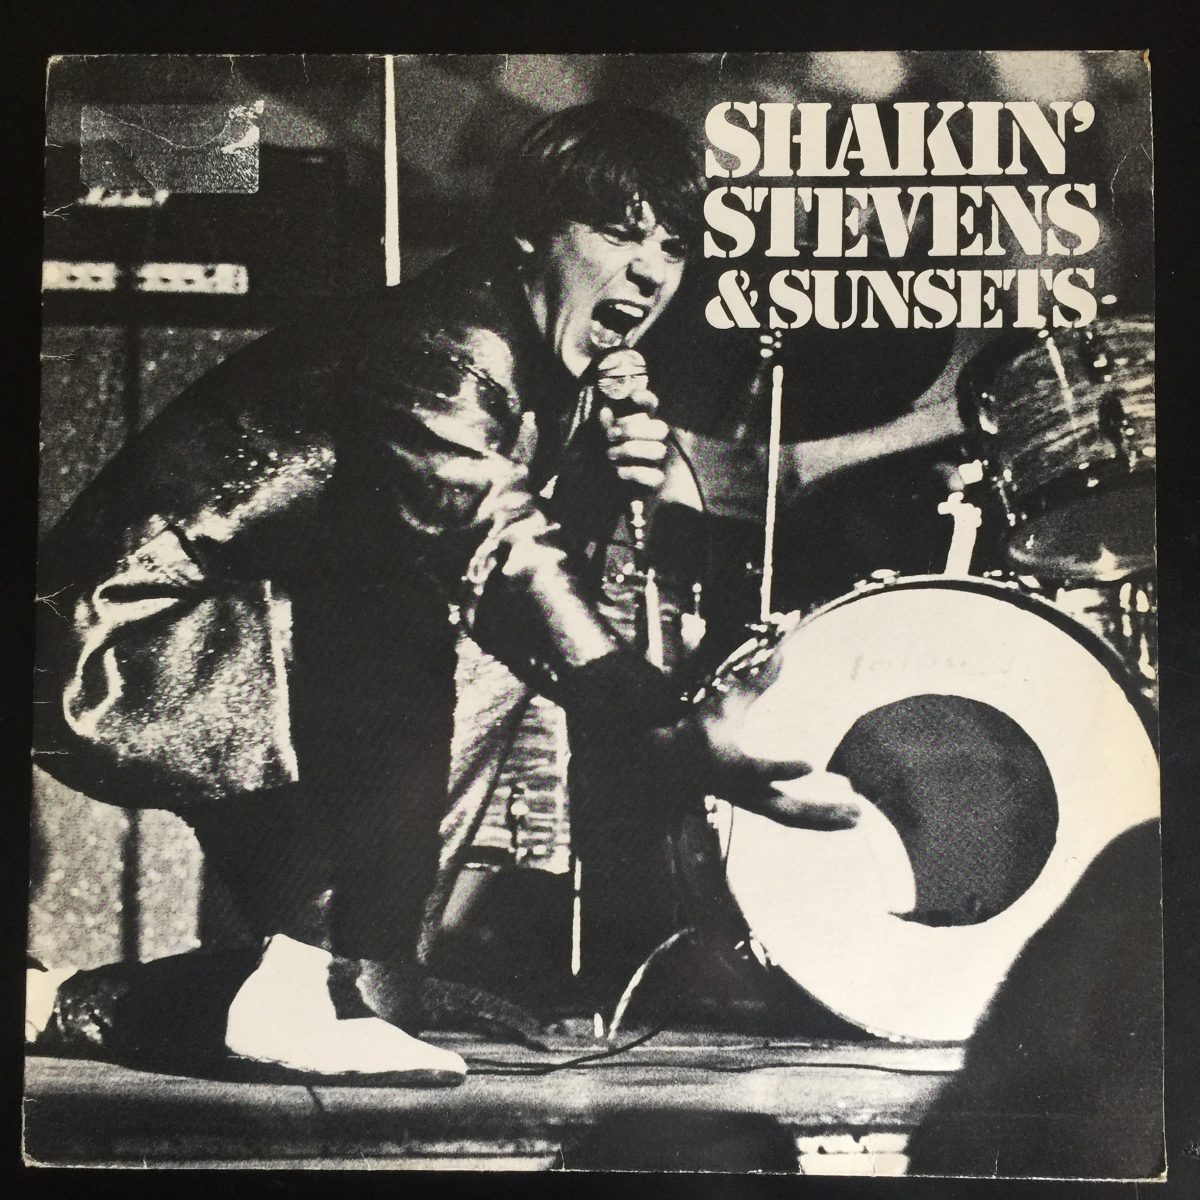 Shakin' Stevens and the sunsets